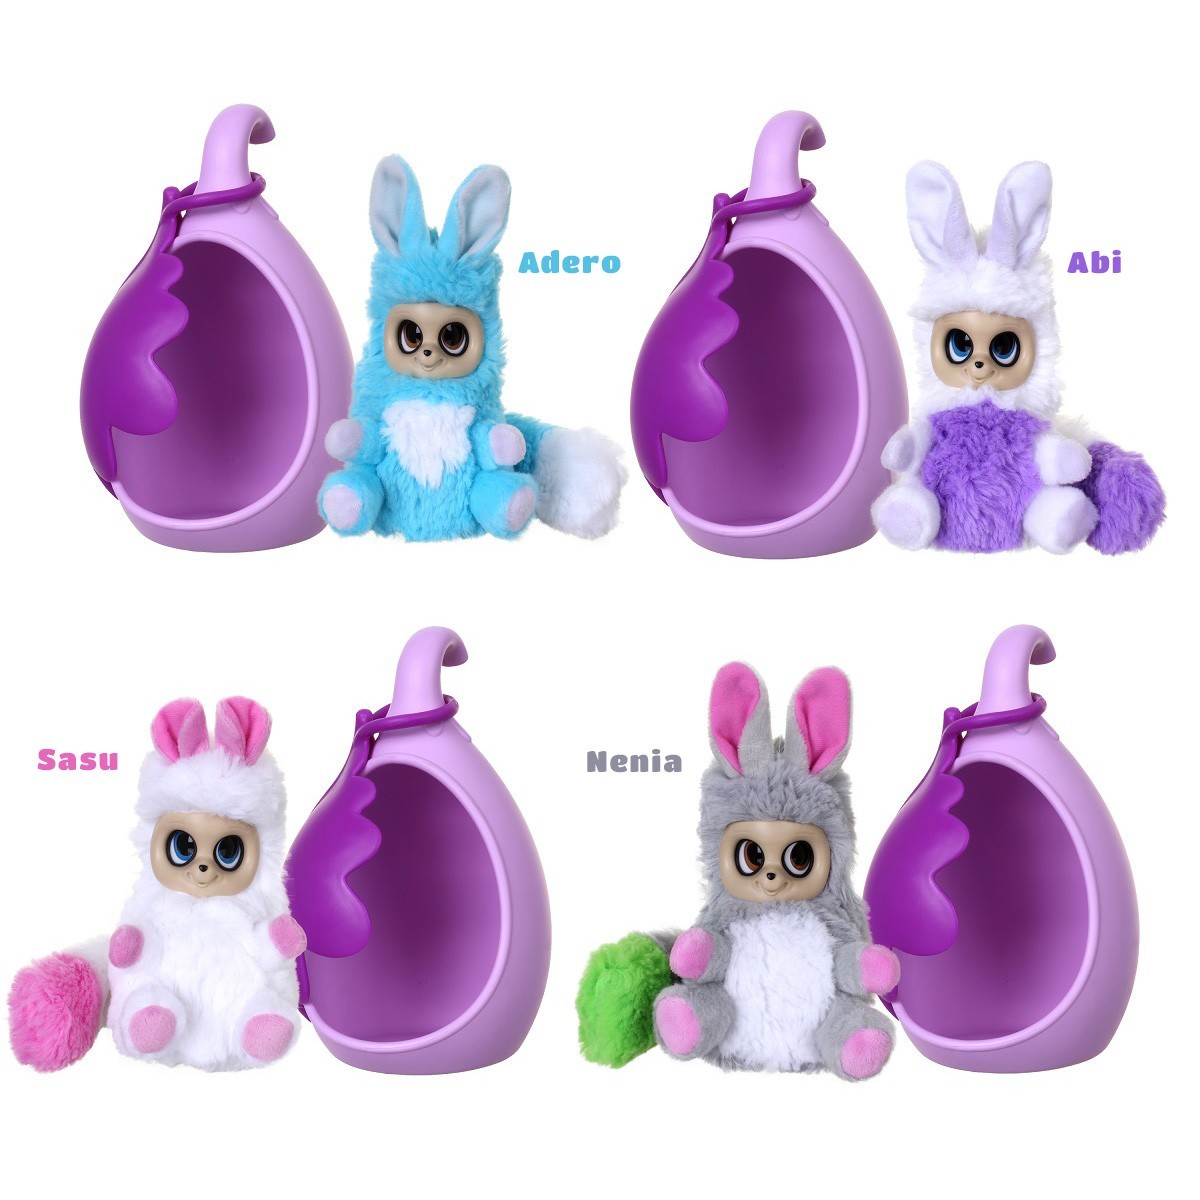 Bush Baby World - Assorted Dreamstars With Sleeping Pods